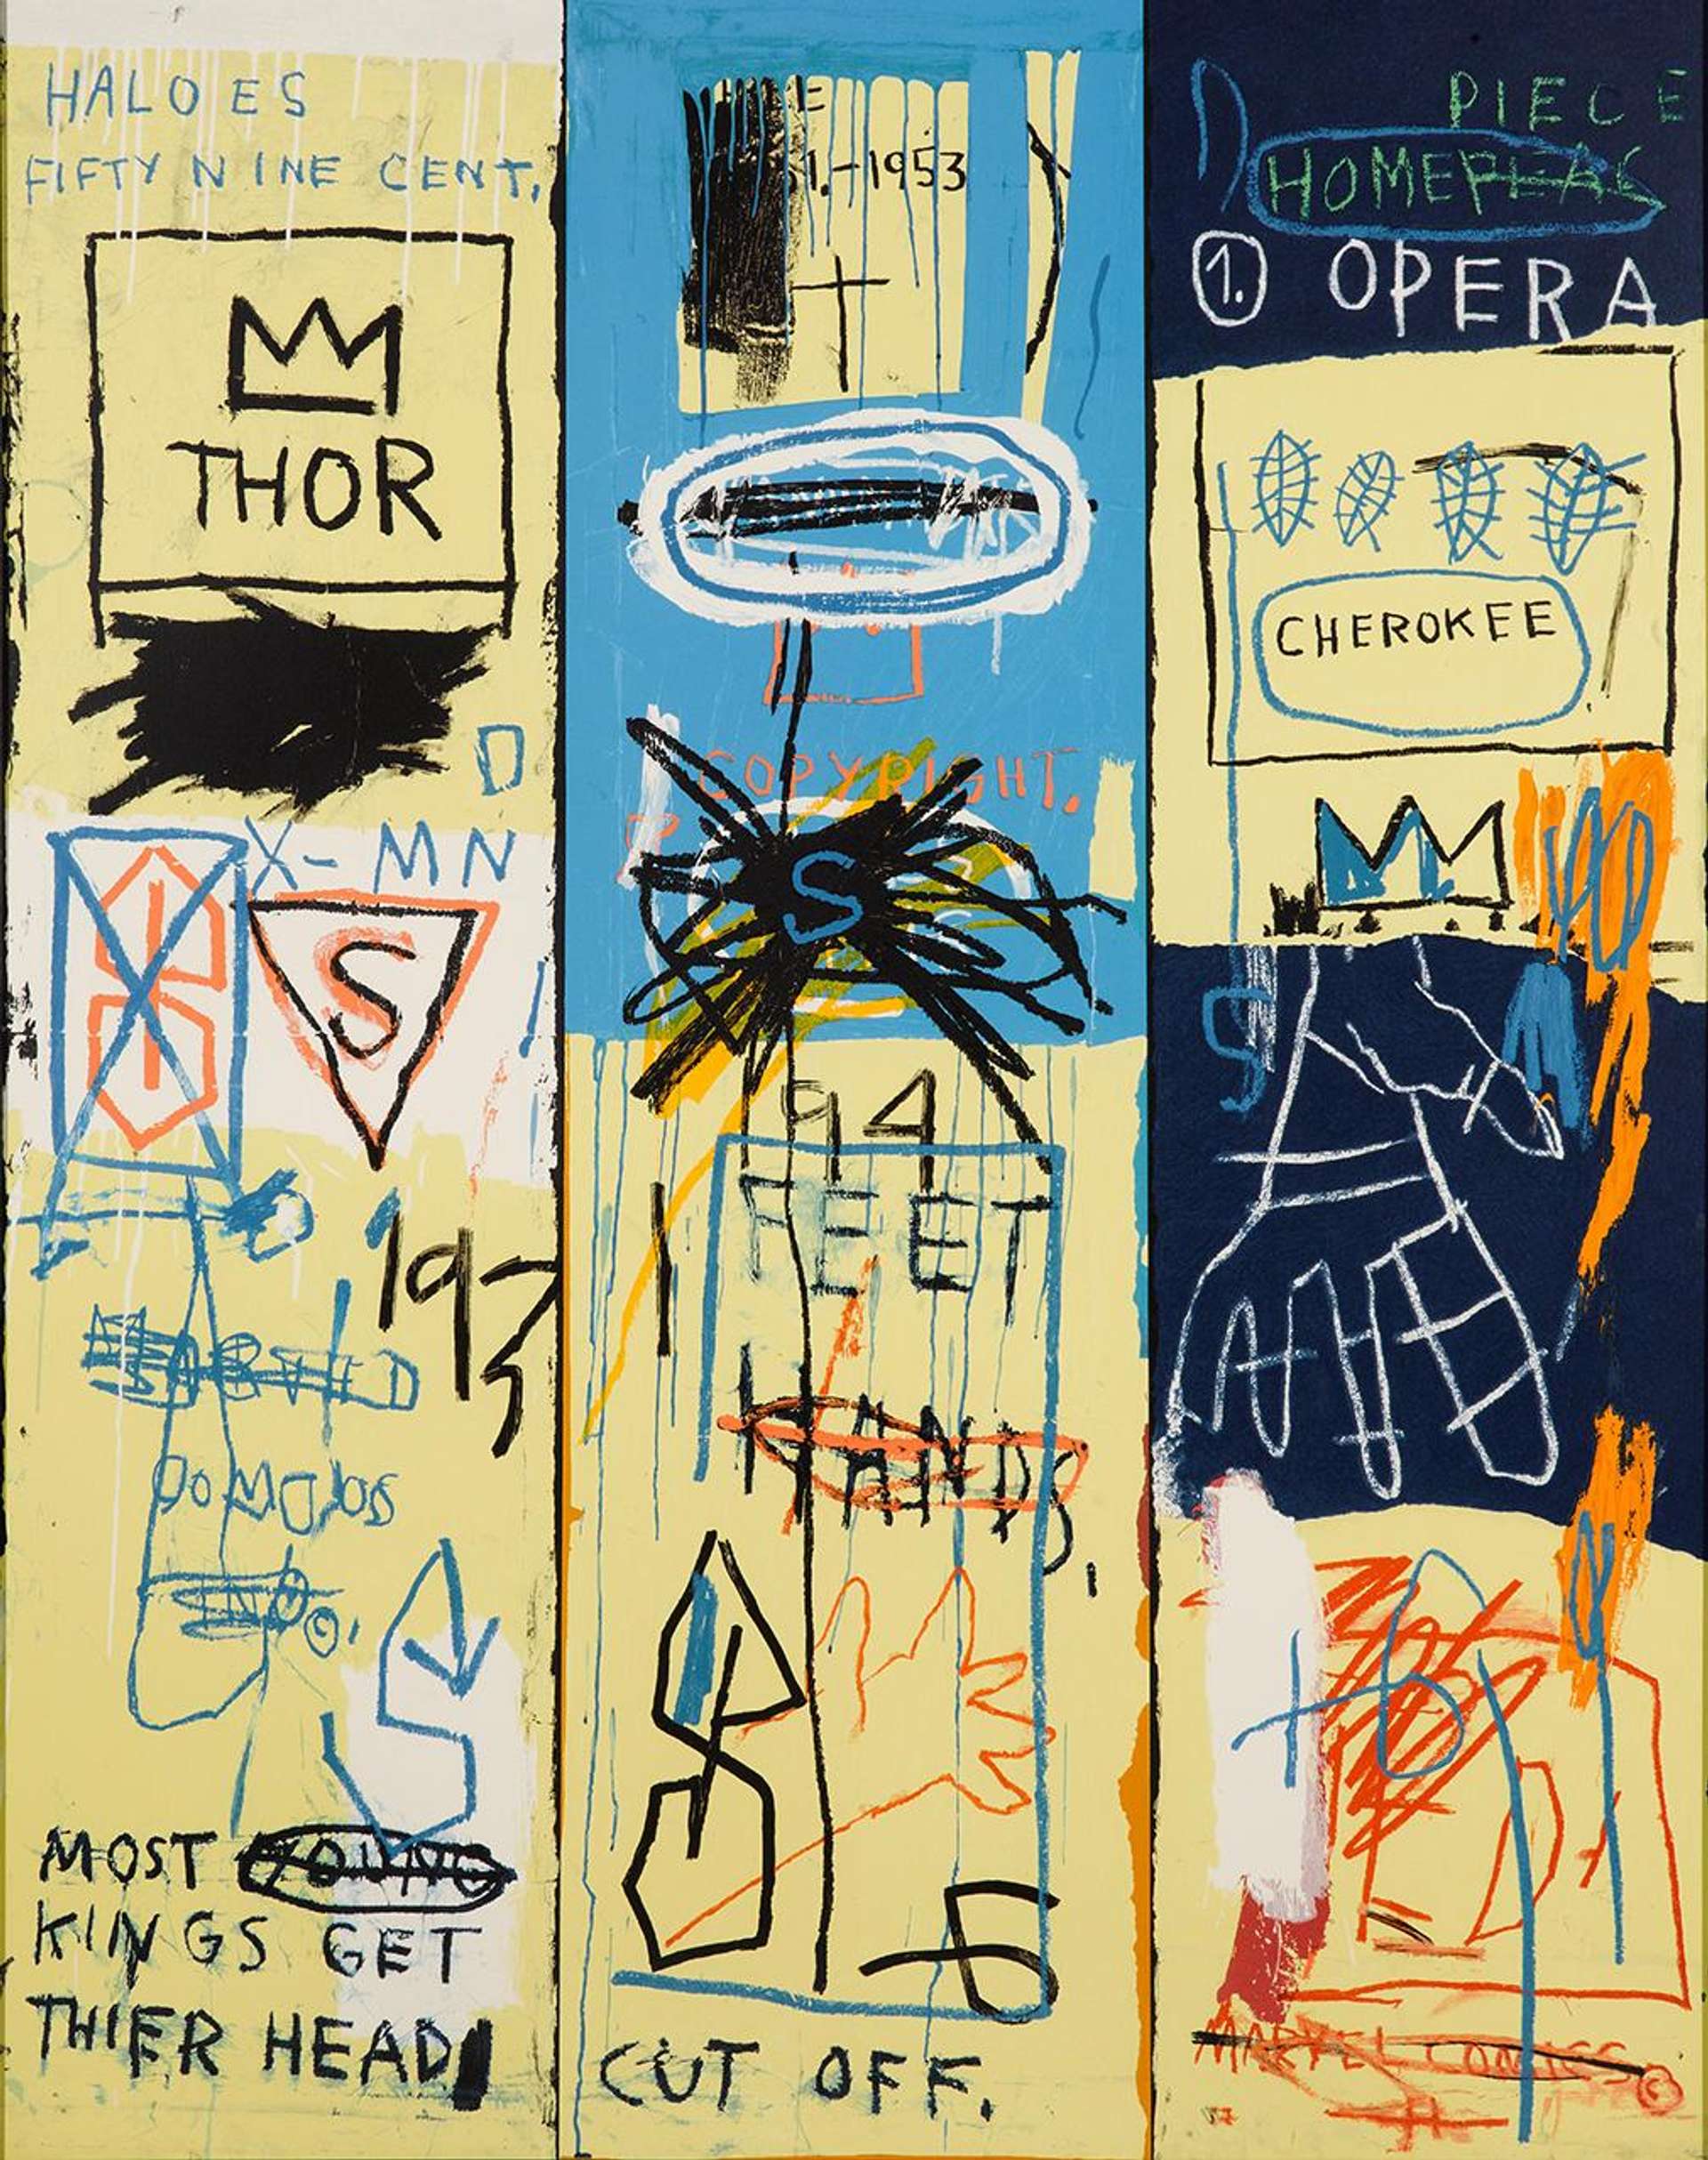 A colorful, graphic portrait painting titled "Charles The First" by Jean-Michel Basquiat, 1982, featuring a rough grid of random sketches and letters, against an abstract background of graffiti-style markings.